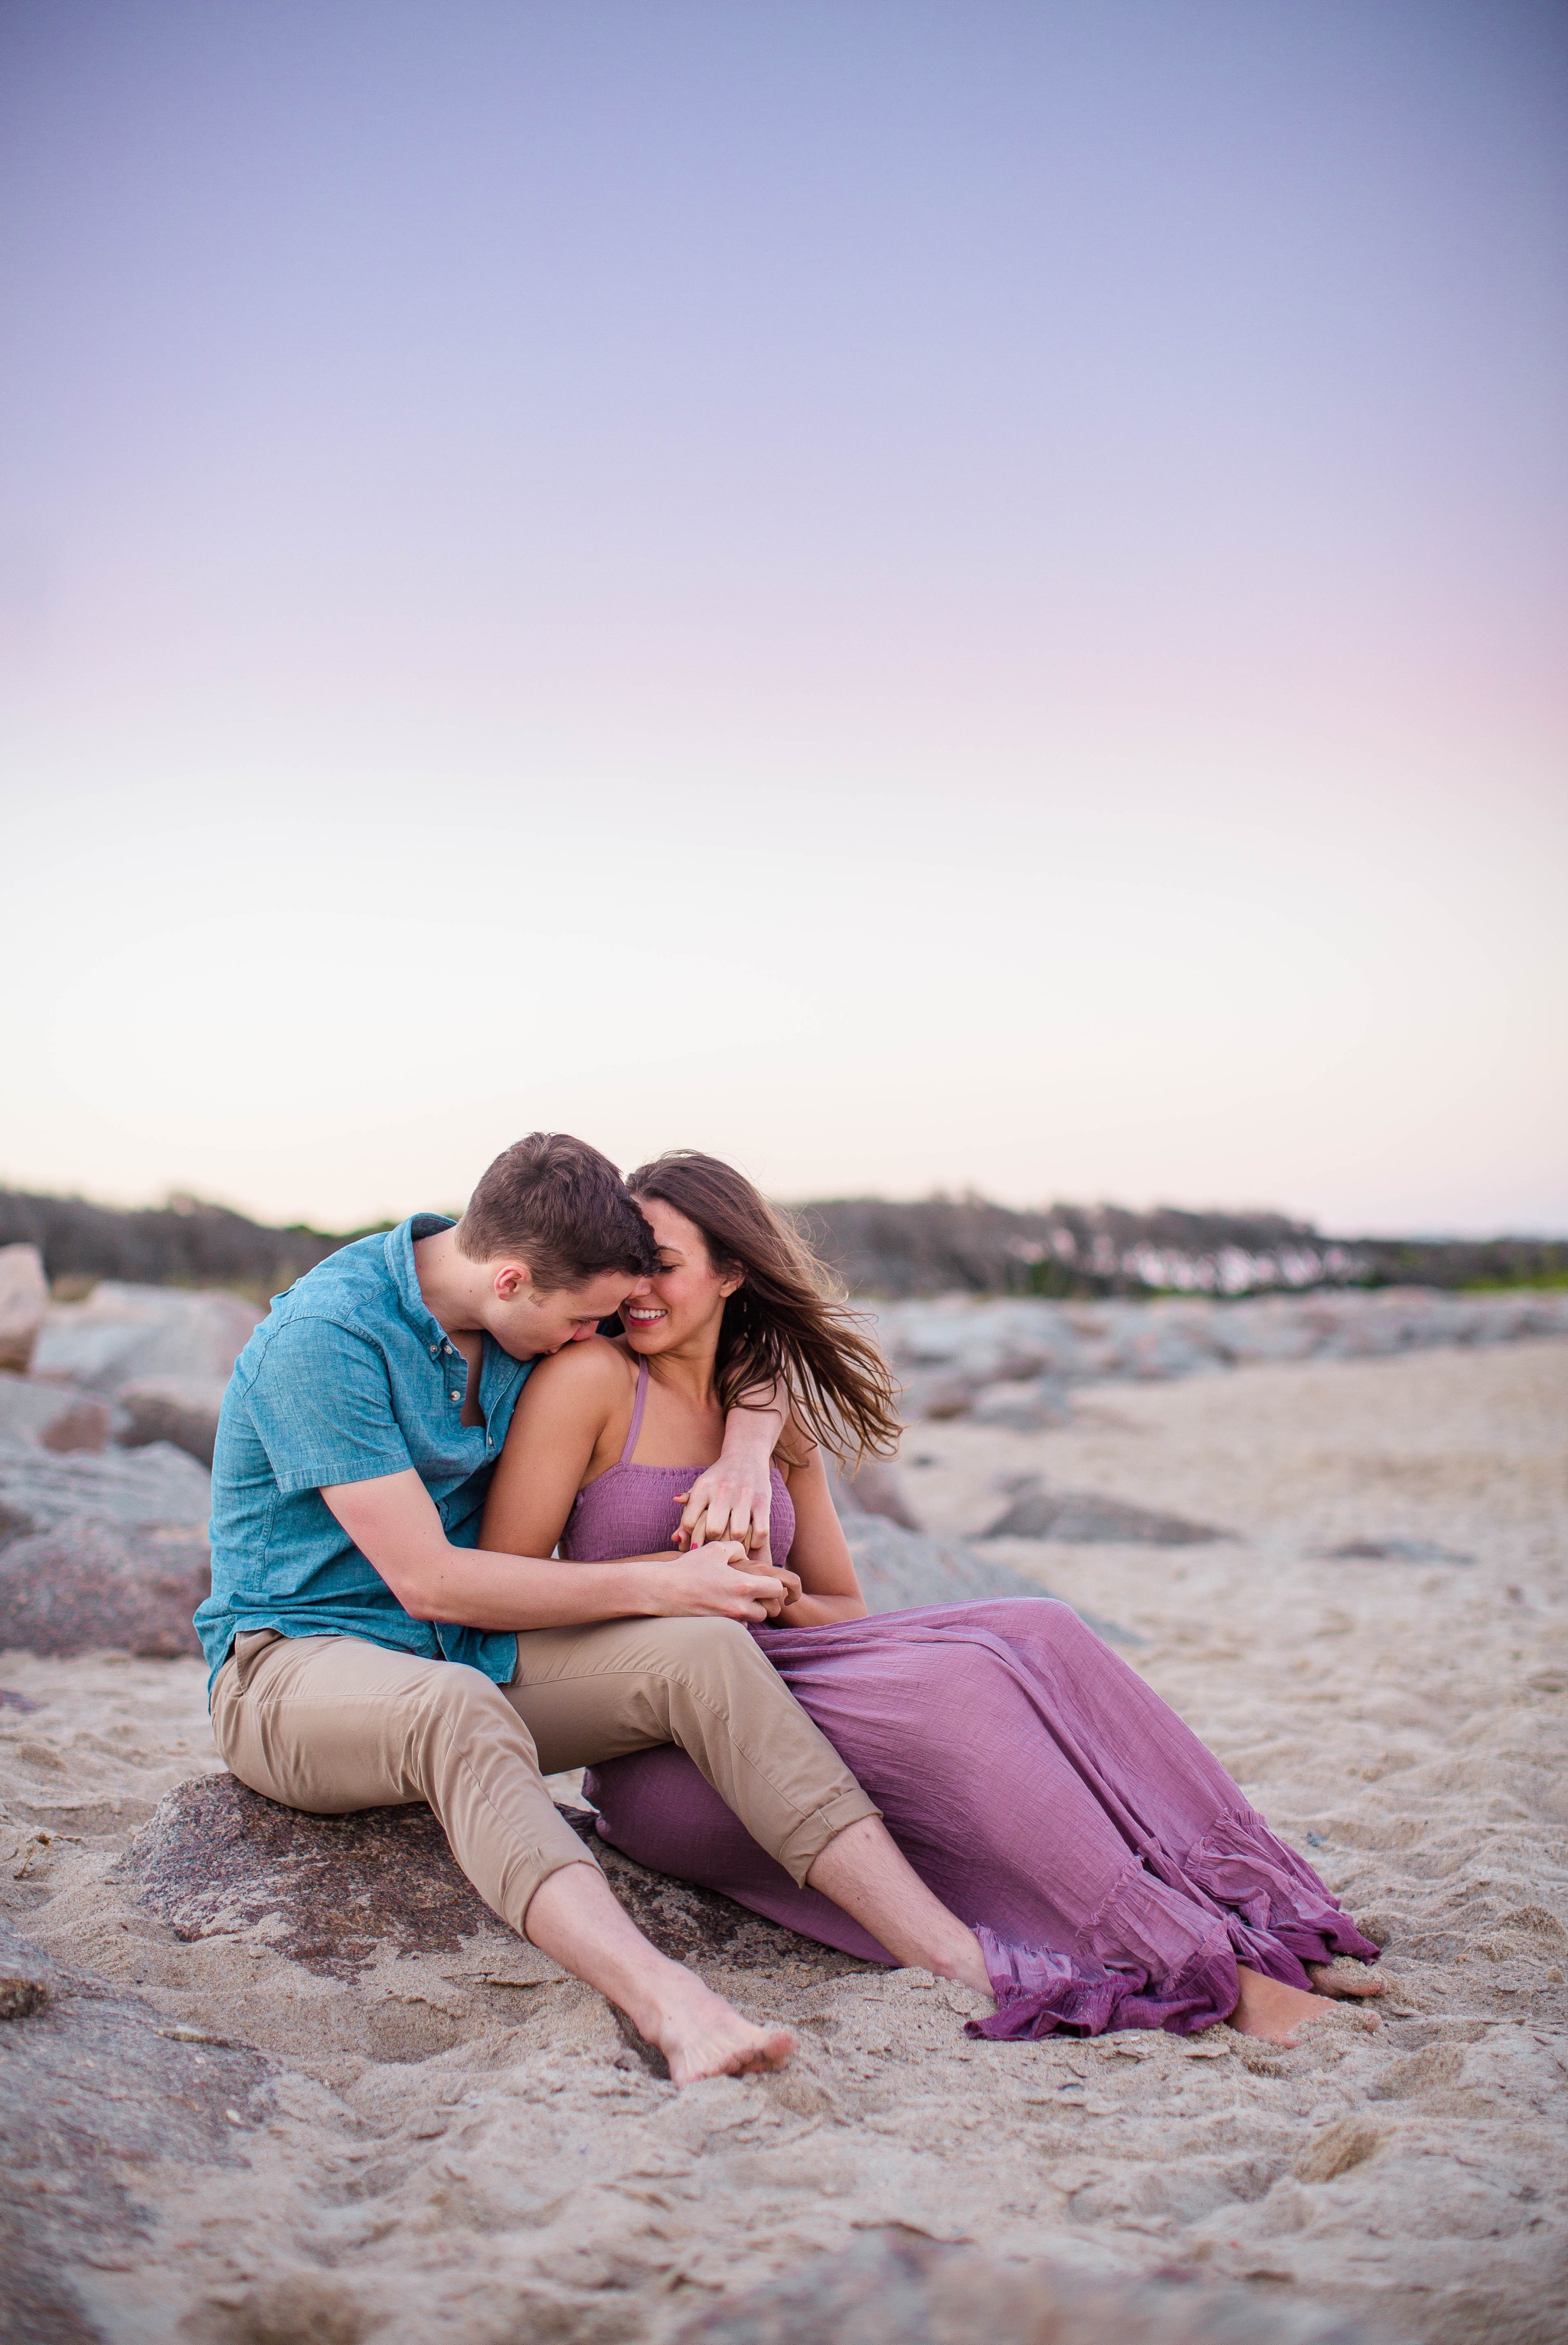  man and woman sitting in the sand kissing - Woman is in a flowy pastel maxi dress - candid and unposed golden light session - beach engagement photographer in honolulu, oahu, hawaii - johanna dye photography 